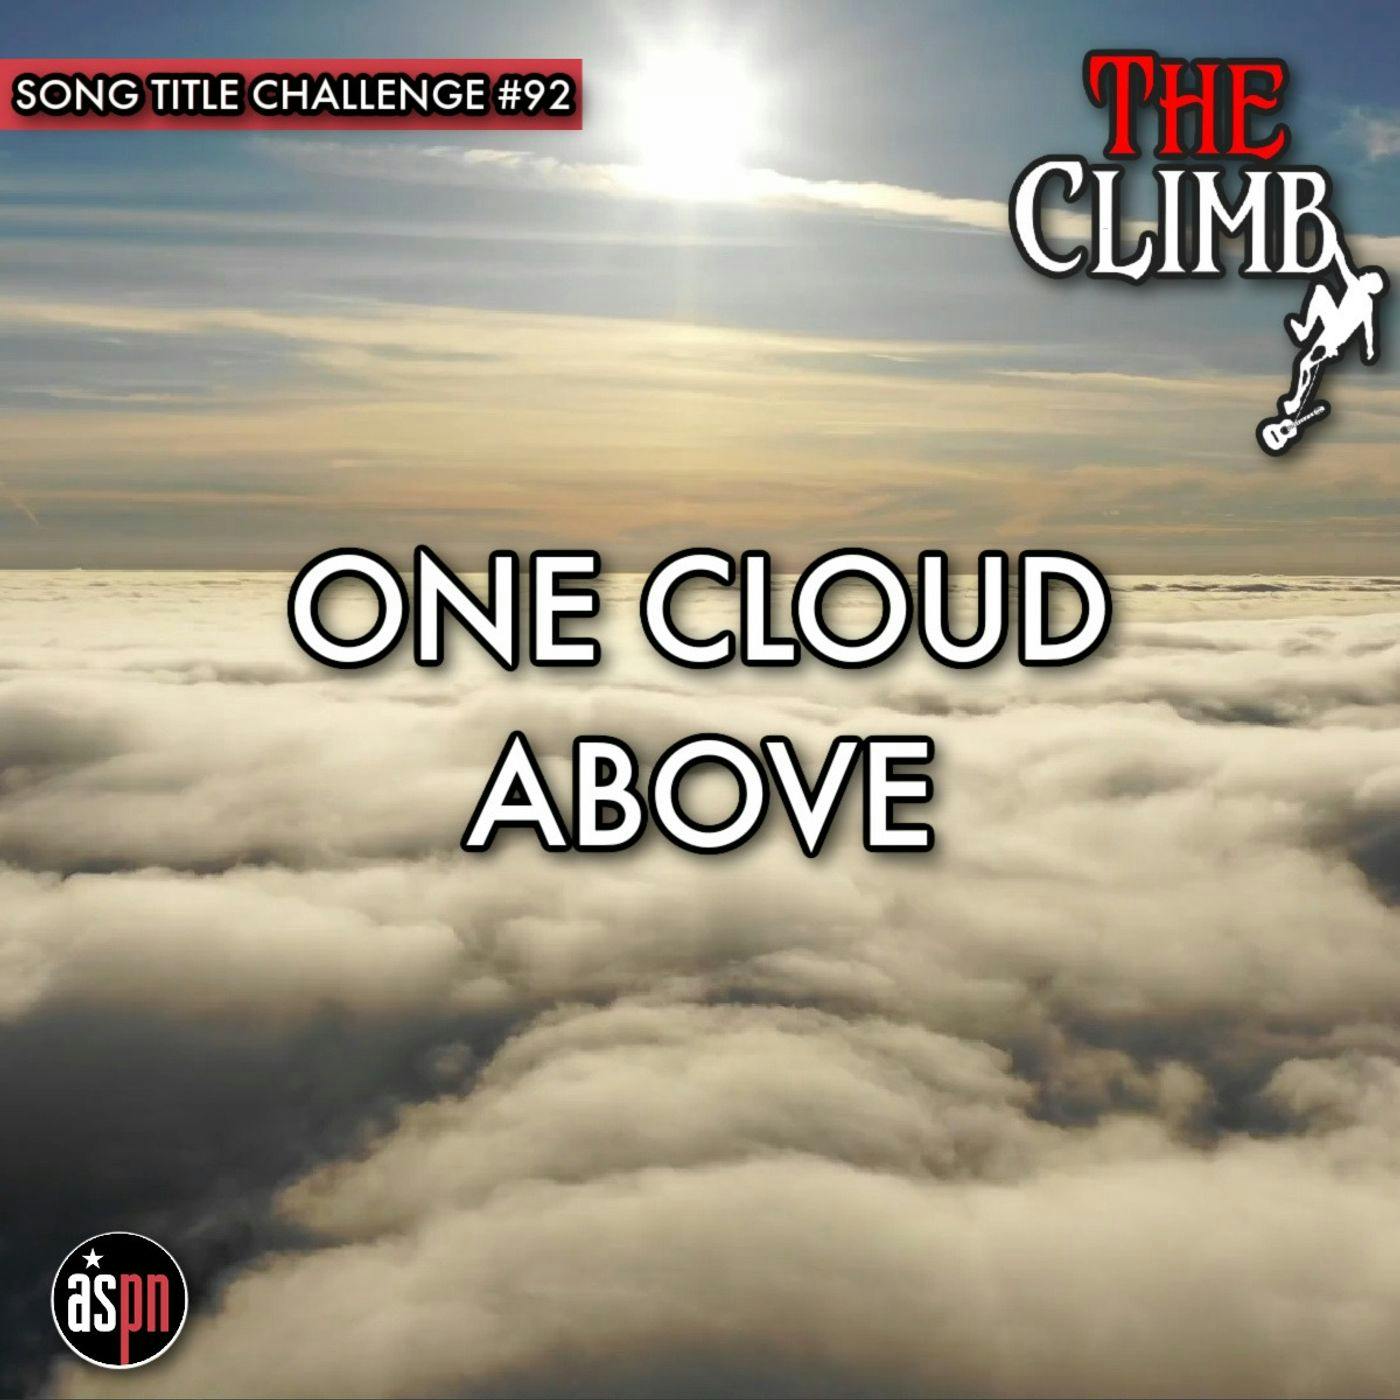 Song Title Challenge #92: One Cloud Above